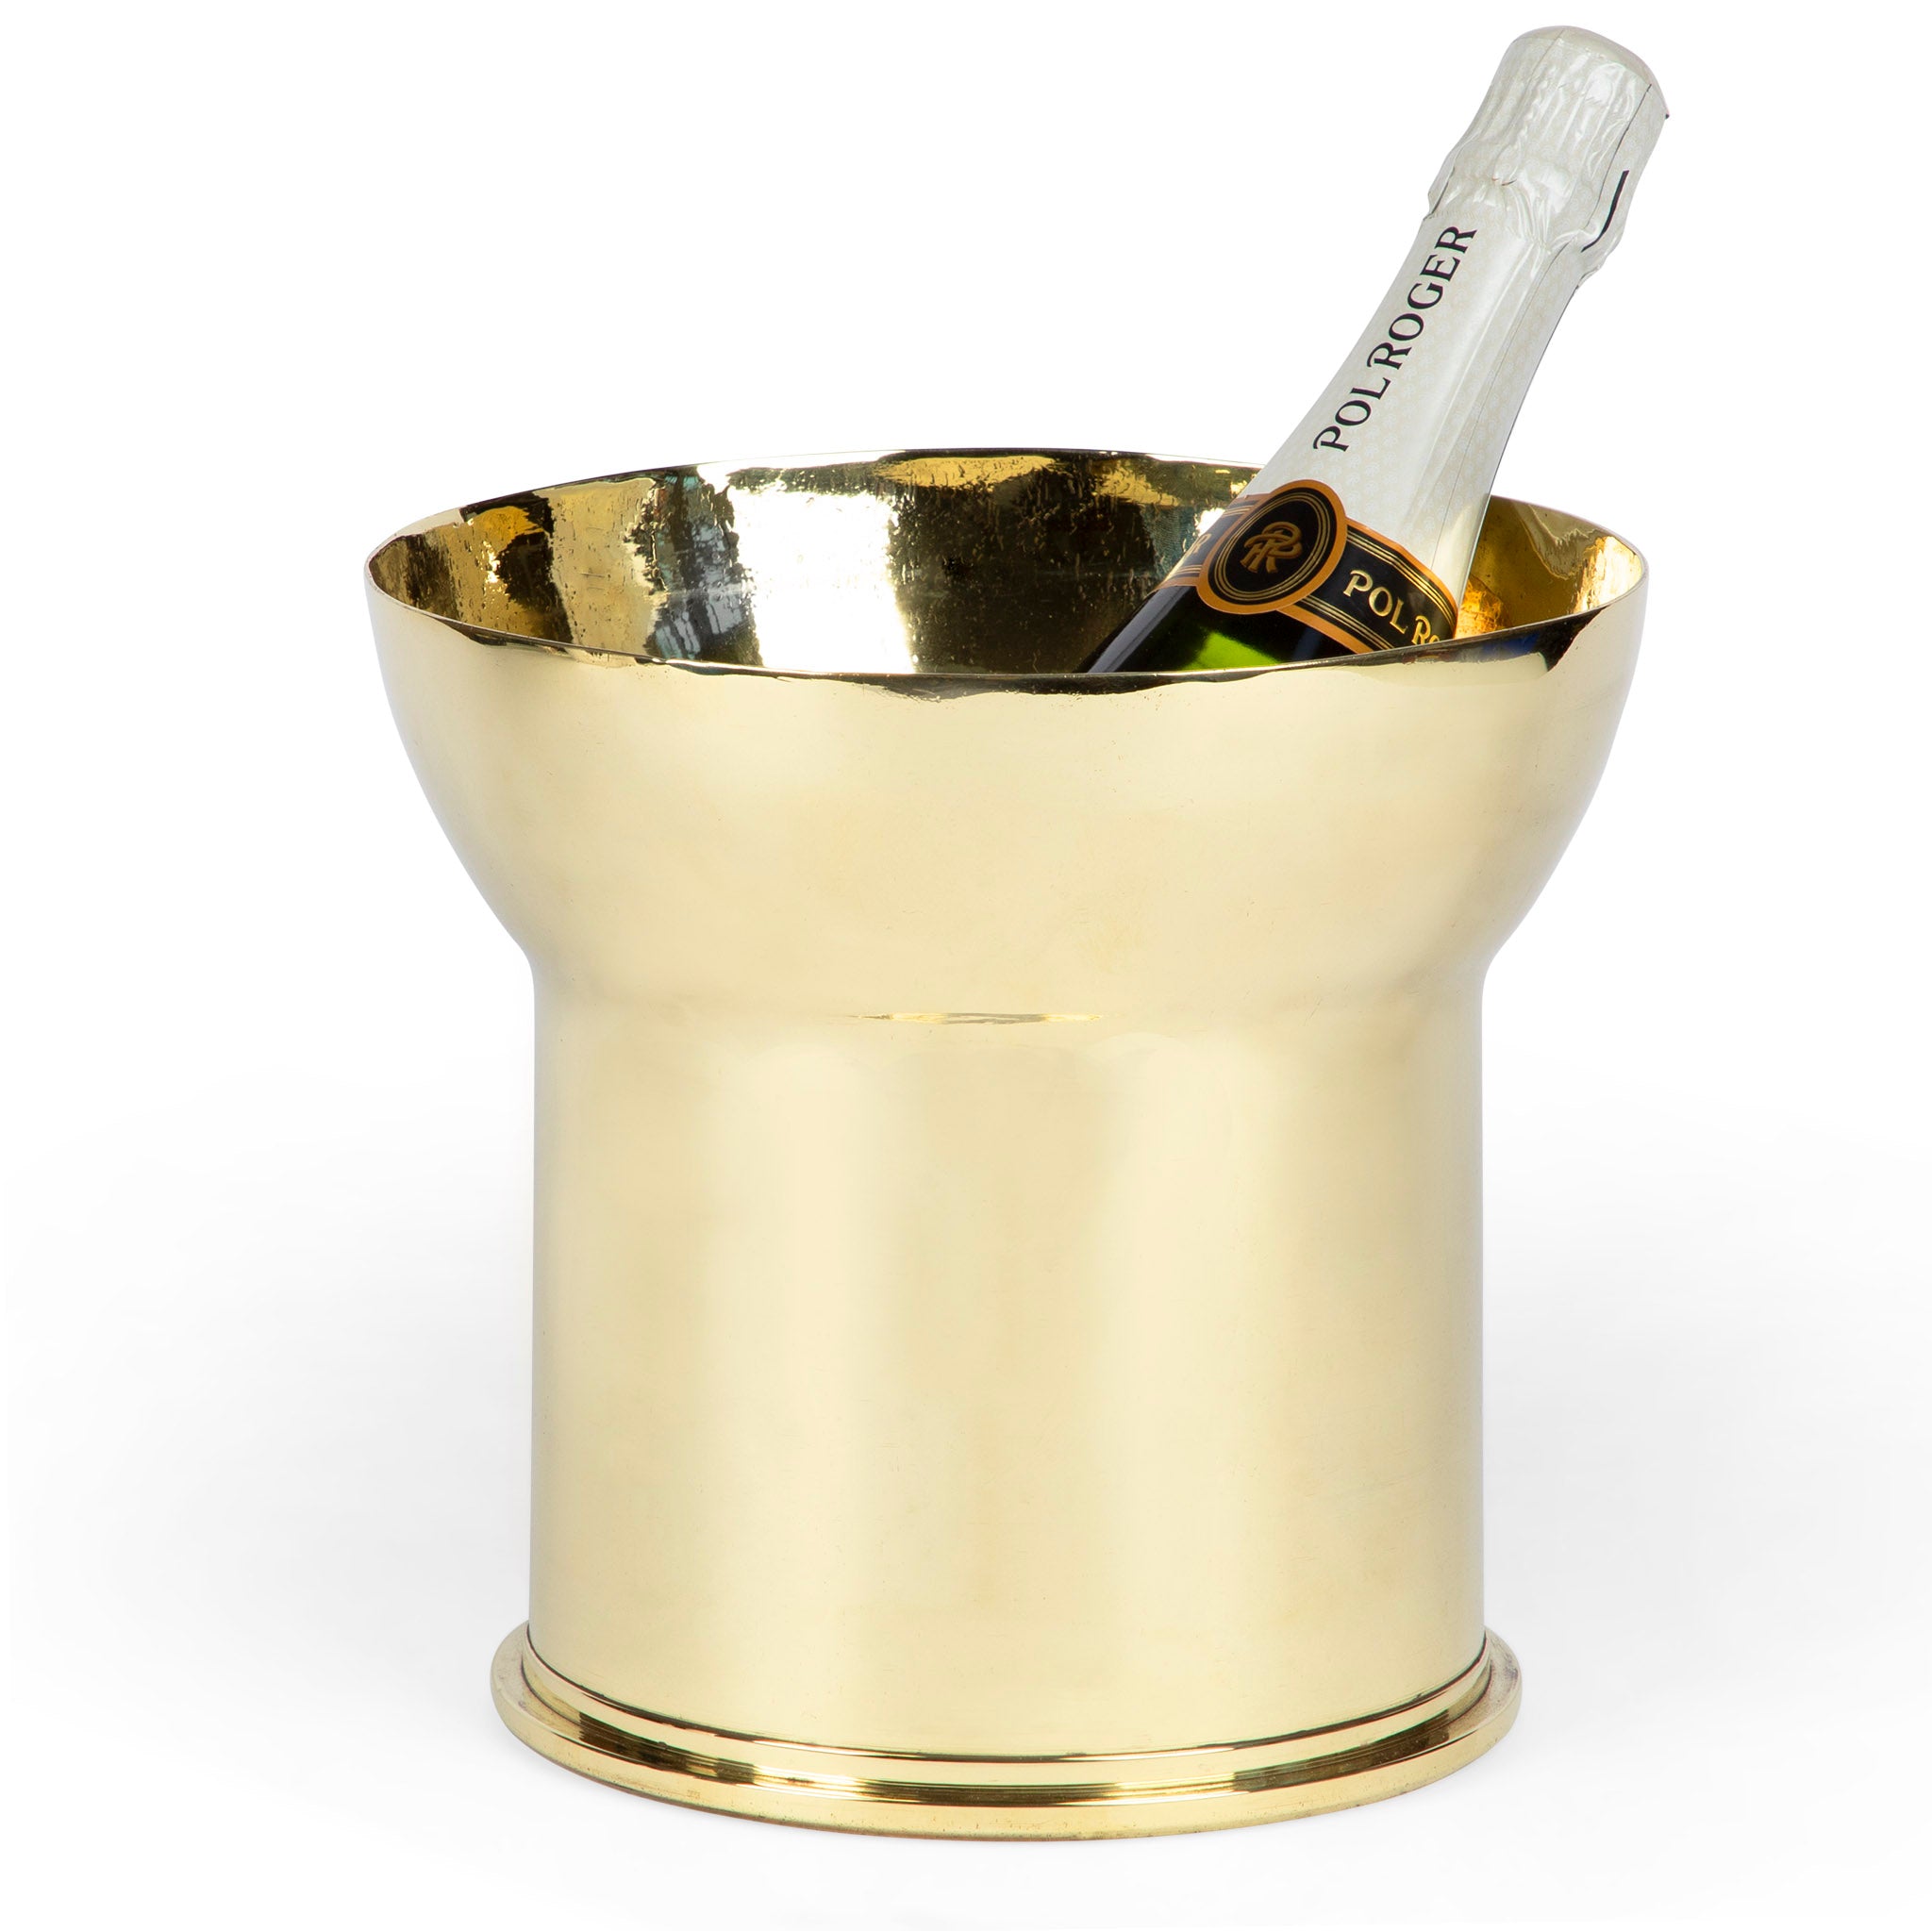 Artillery Shell Trench Art Champagne Bucket Wine Cooler